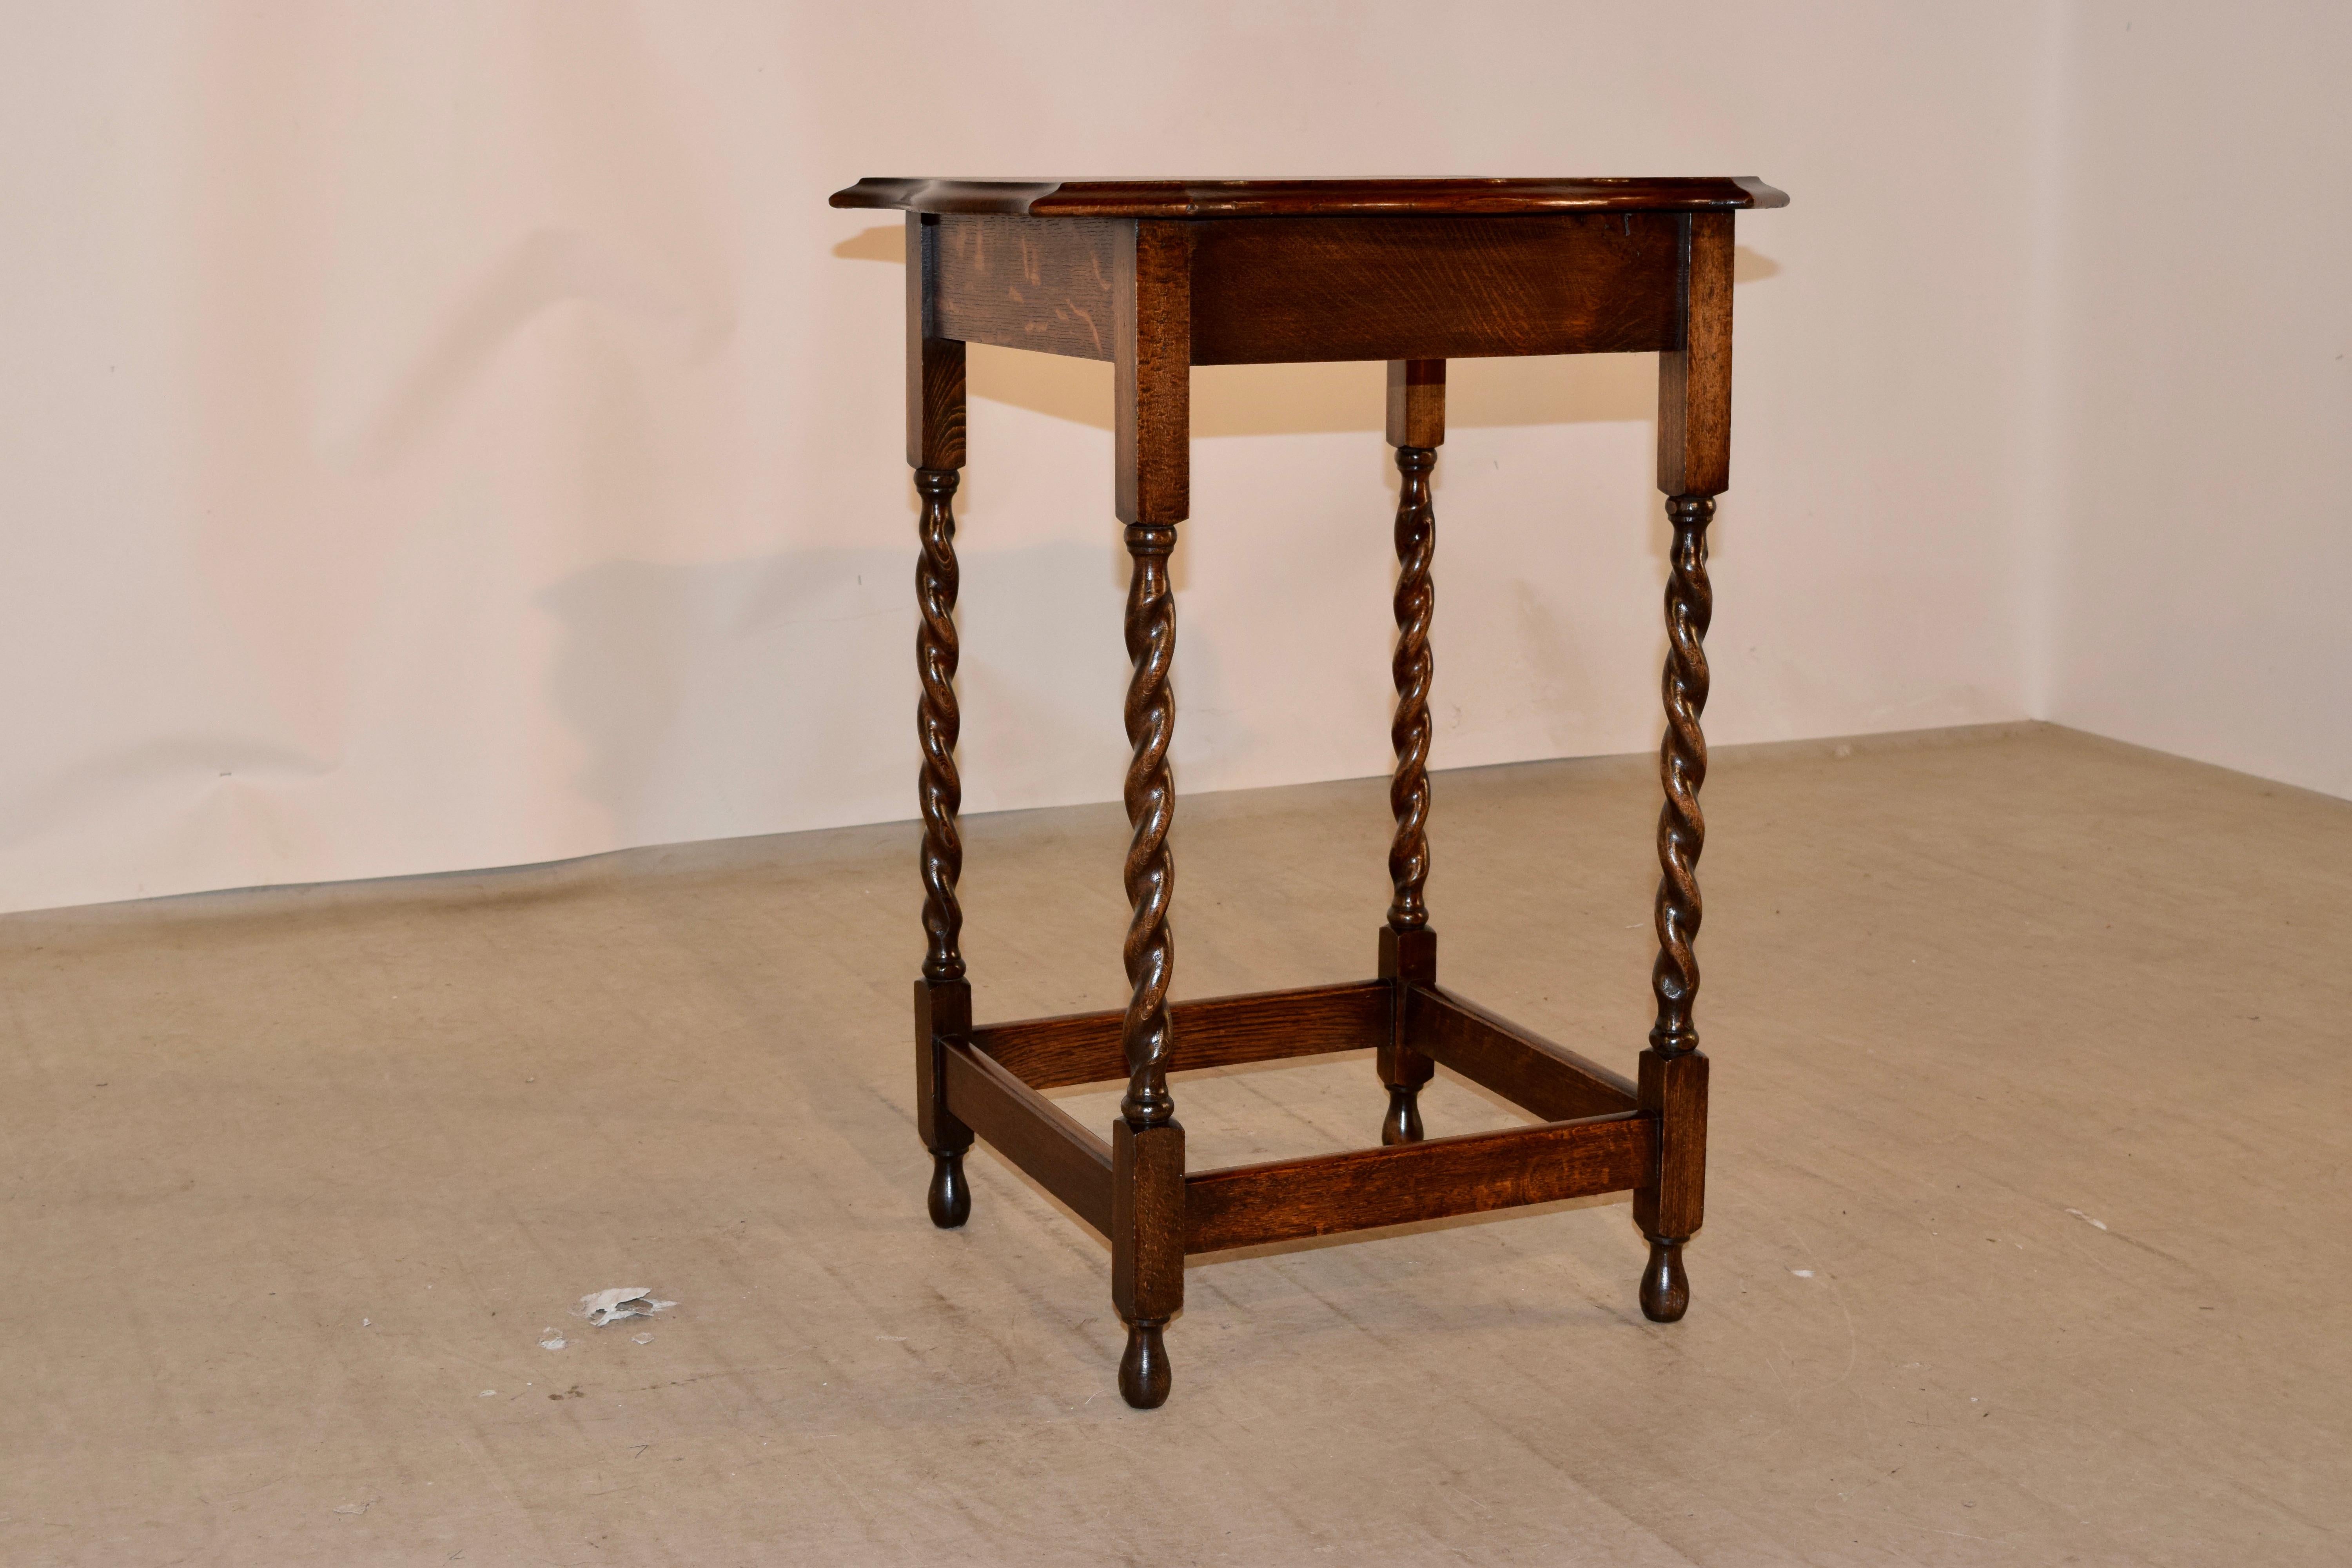 English occasional table, circa 1900 made from oak. The top is scalloped and has a beveled edge, following down to a simple apron and supported on hand-turned barley twist legs, joined by stretchers and raised on turned feet.